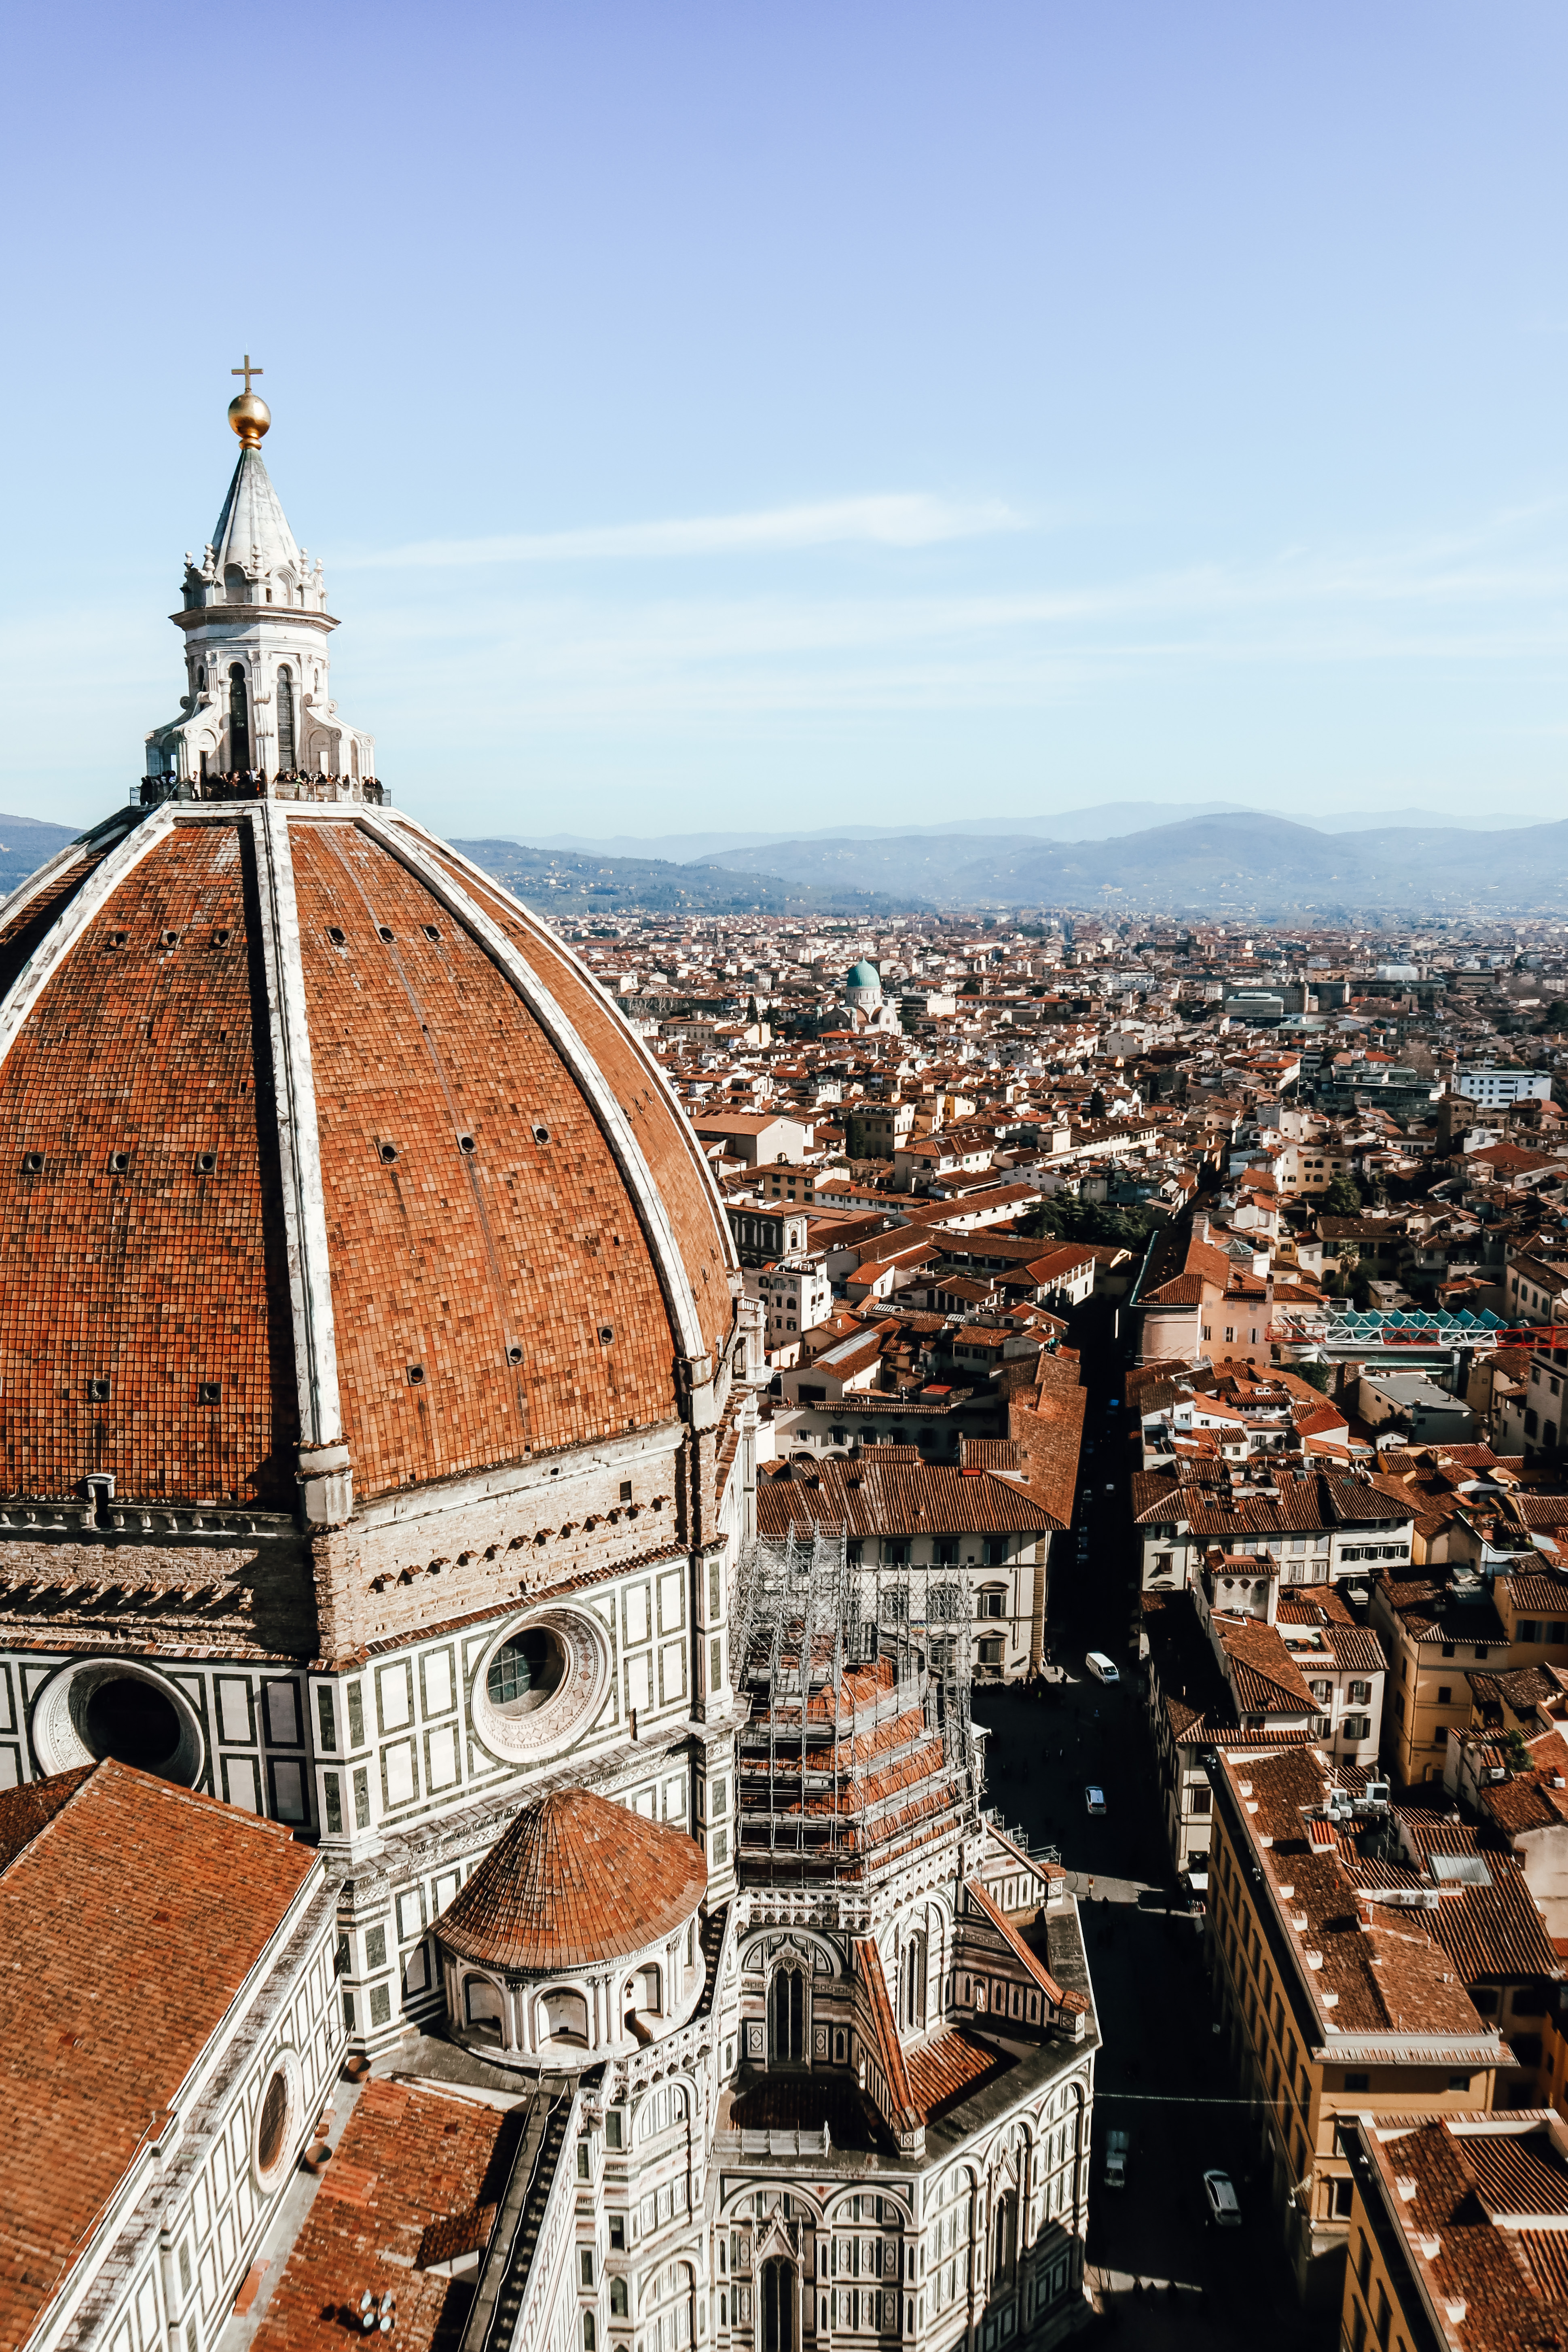 Brunelleschi Dome in Florence